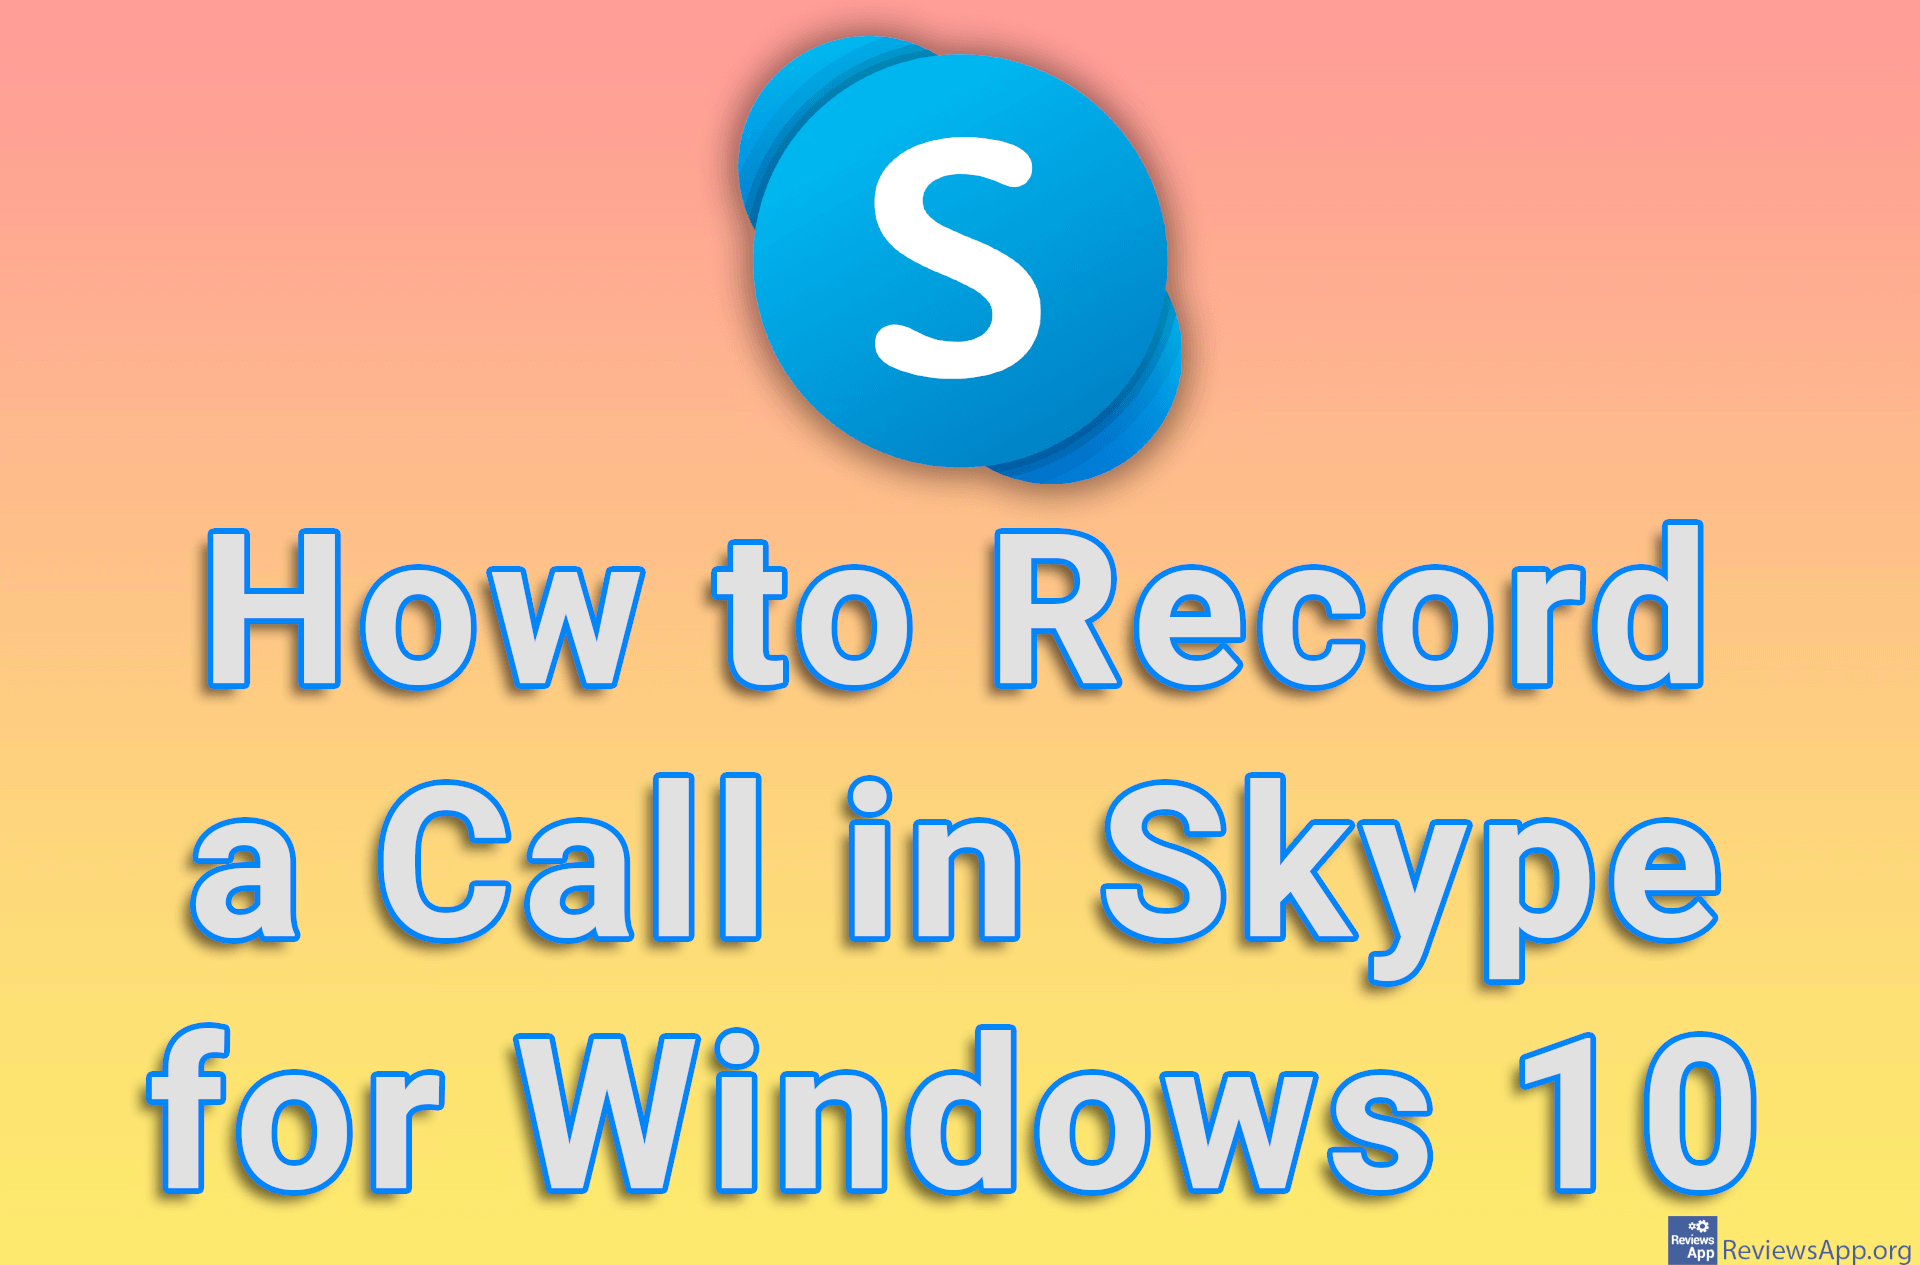 How to Record a Call in Skype for Windows 10